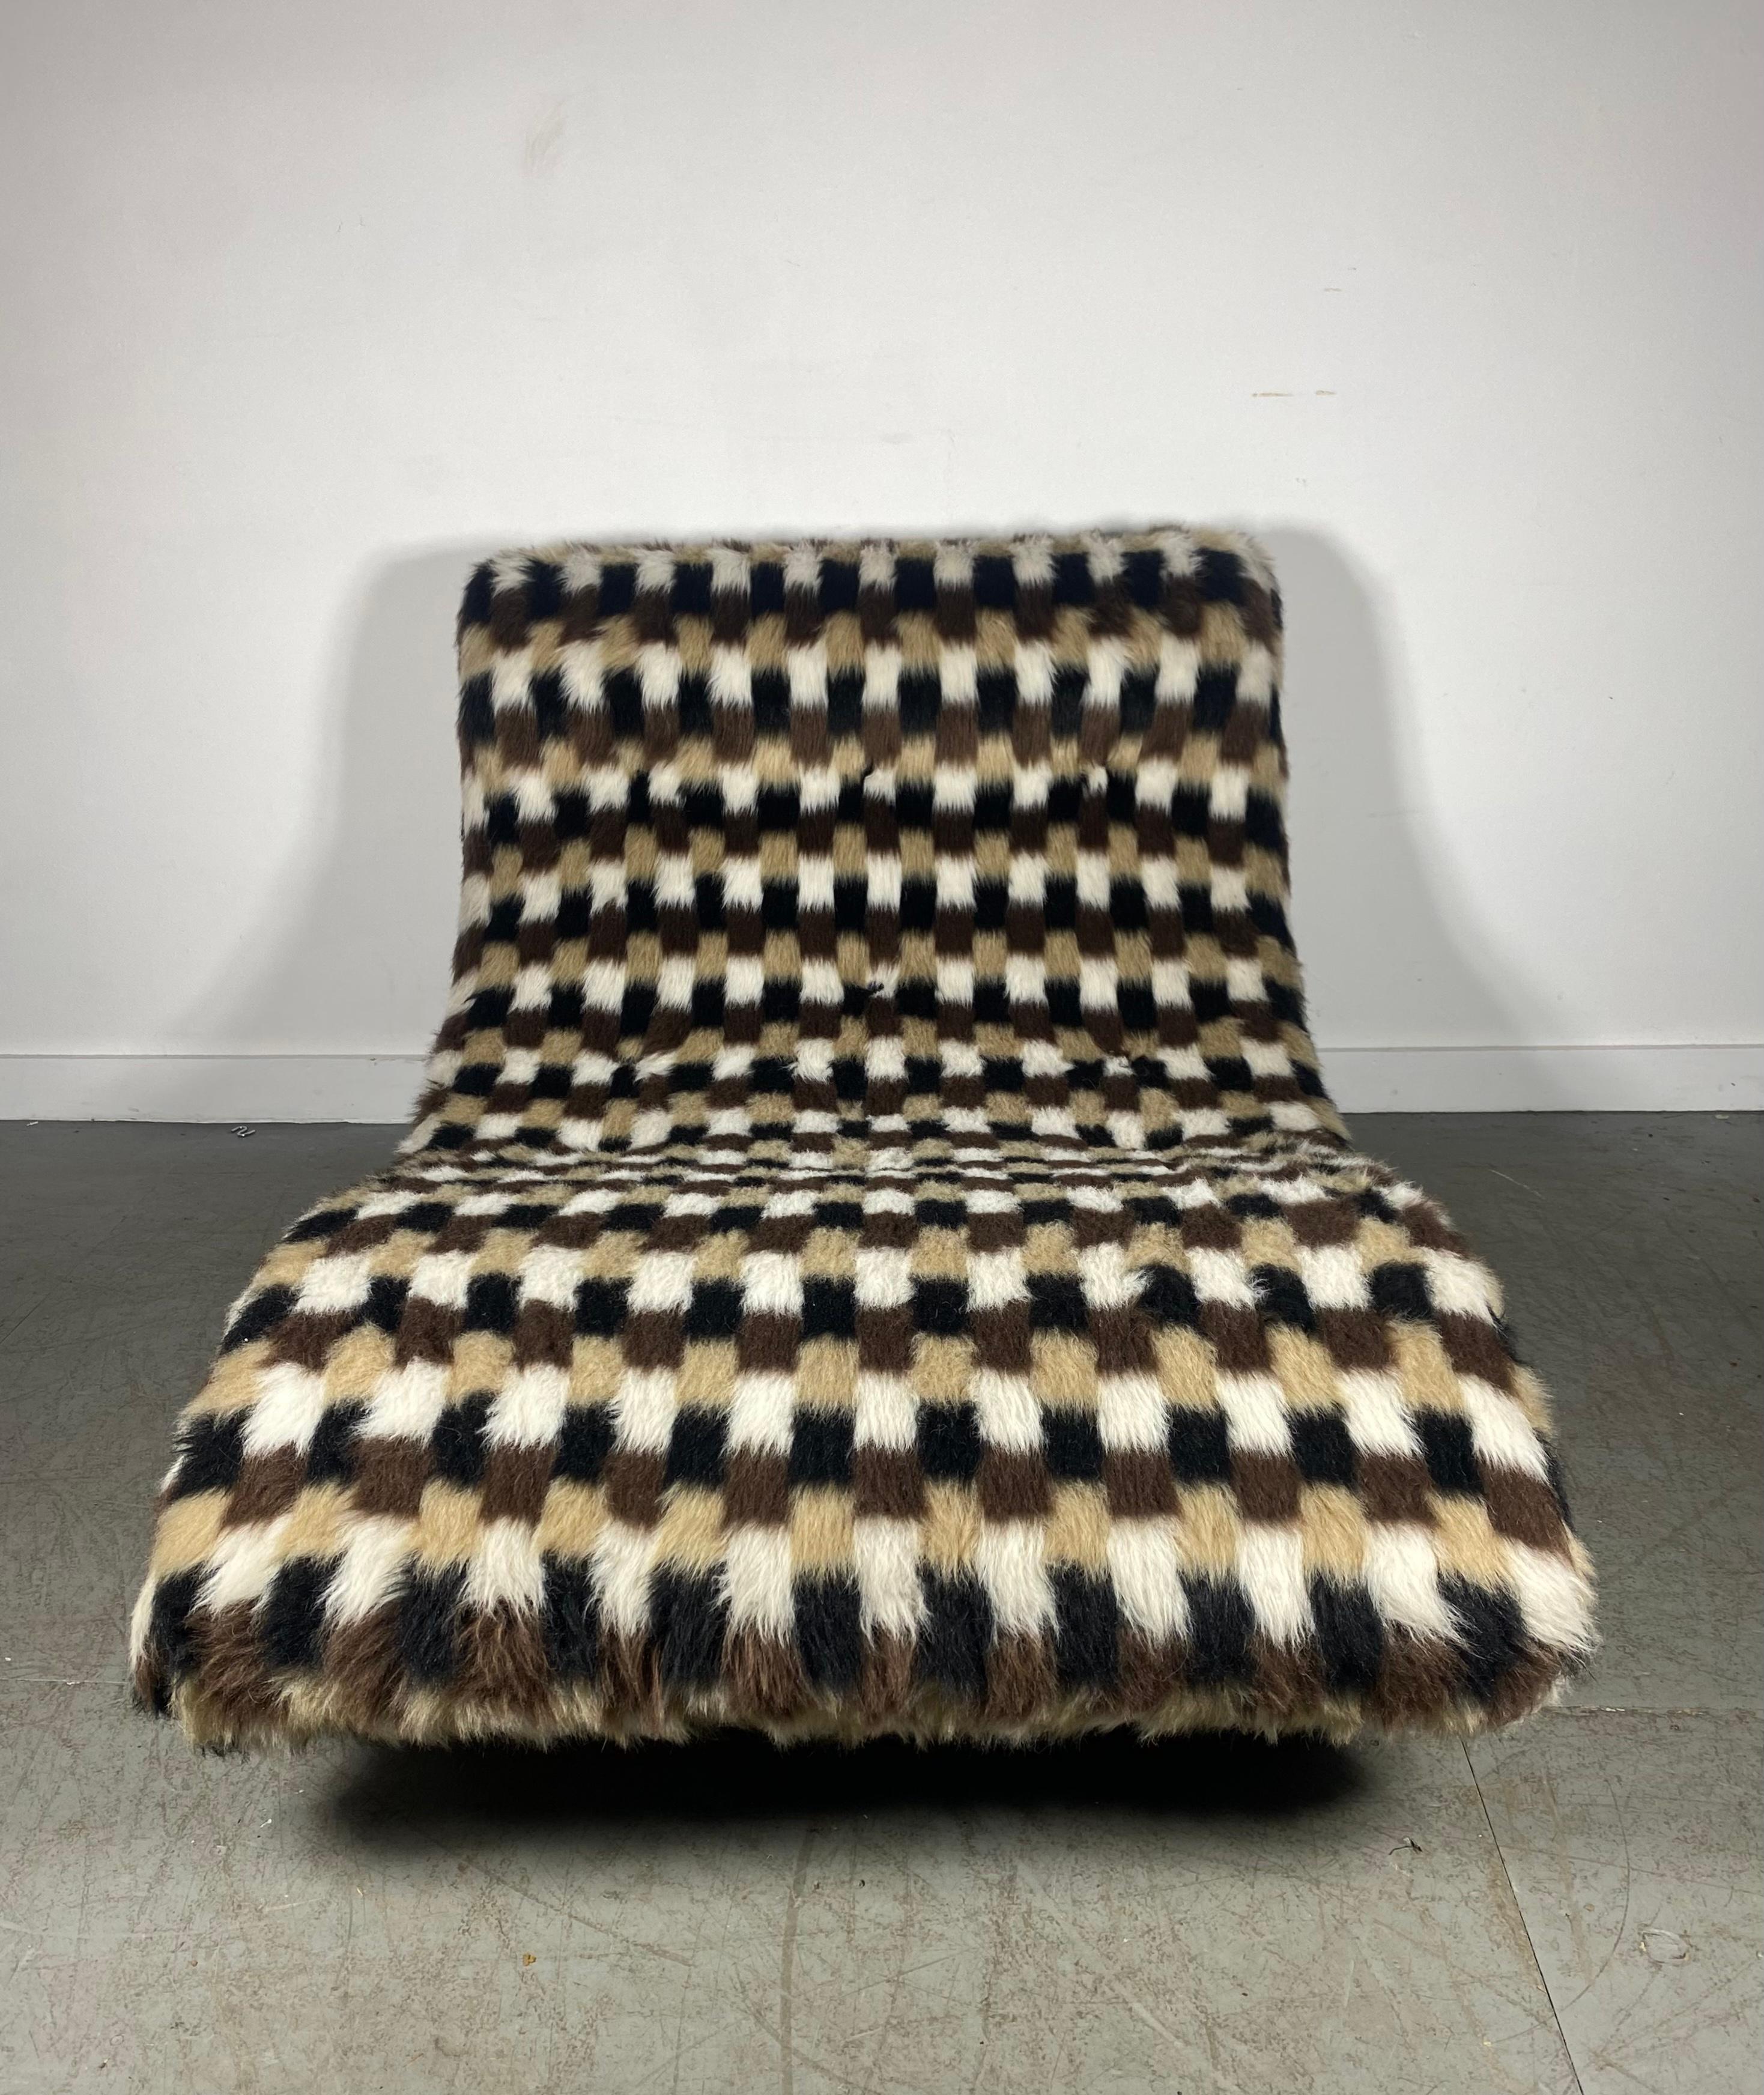 Mid-20th Century Modernist Adrian Pearsall Wave Chaise Lounge in original geometric fabric For Sale